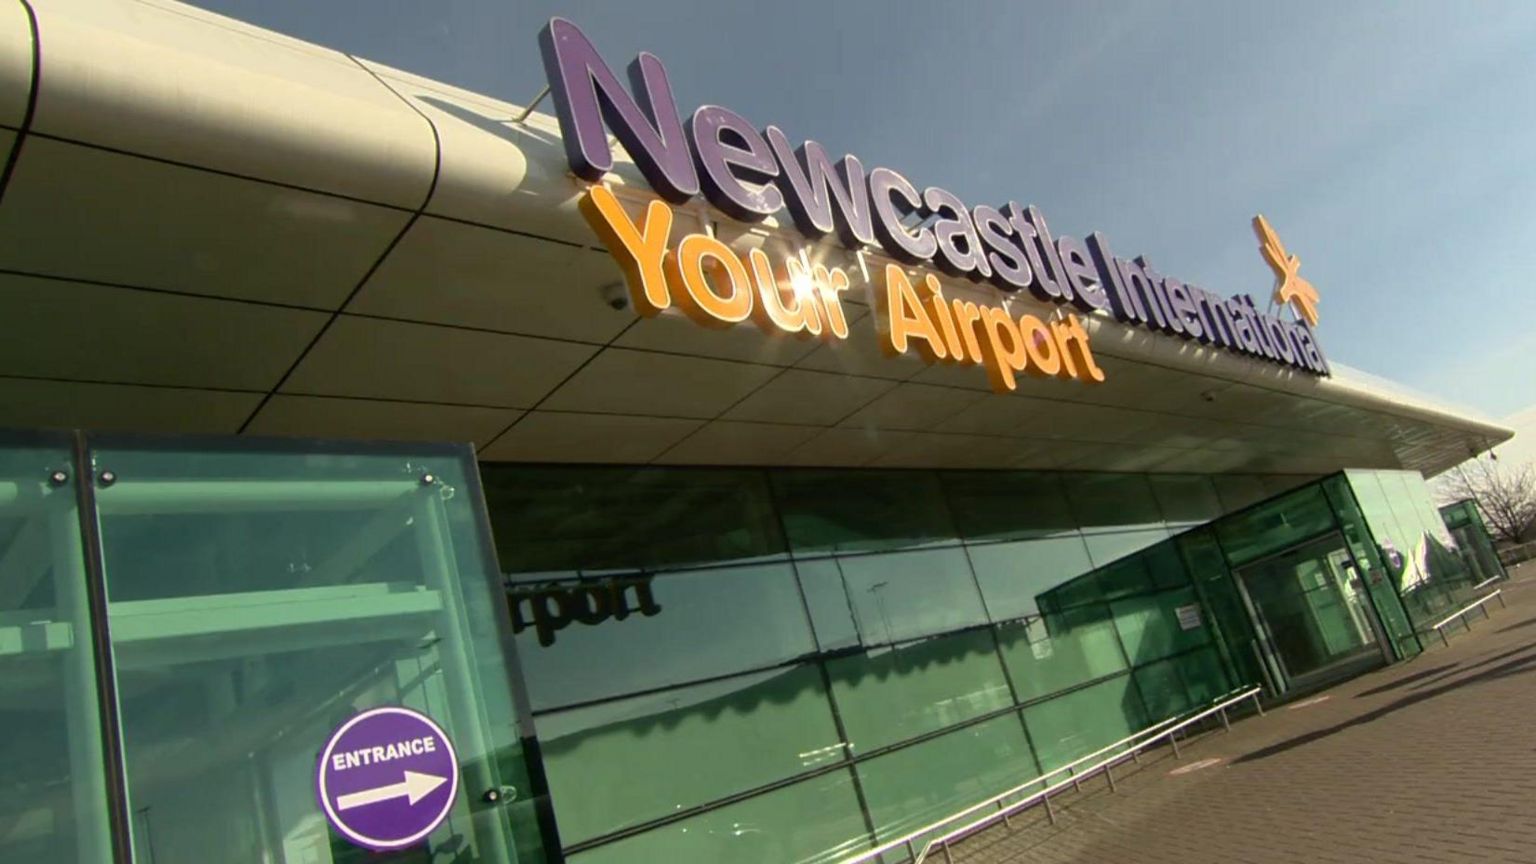 A night bus will link Newcastle City Centre to the airport 